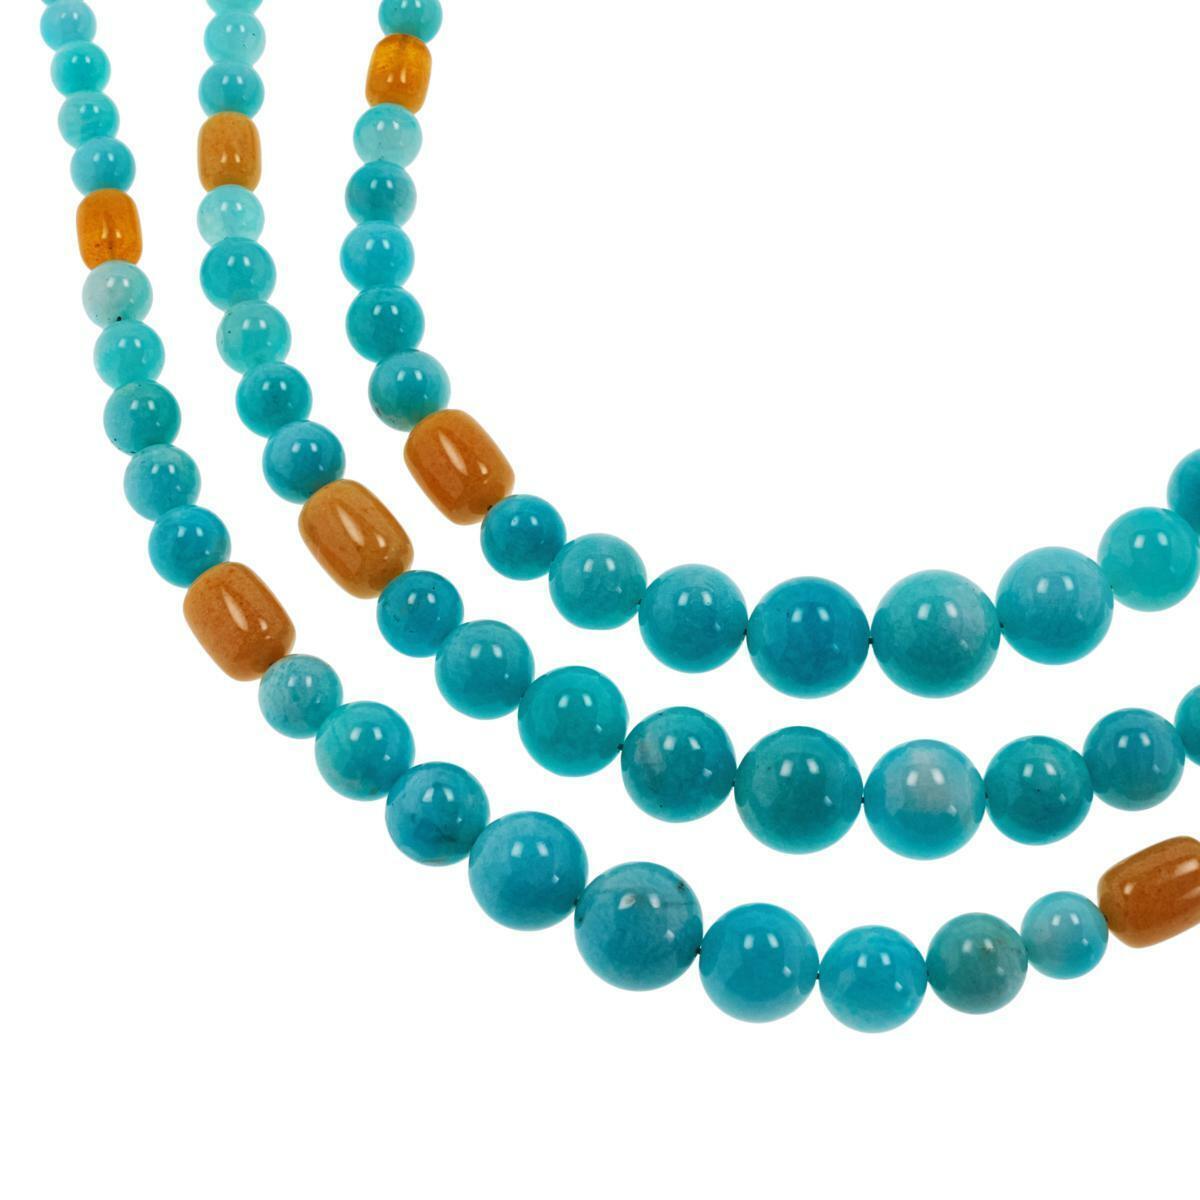 Jay King Sterling Silver Amazonite and Butterscotch Bead 18" Necklace